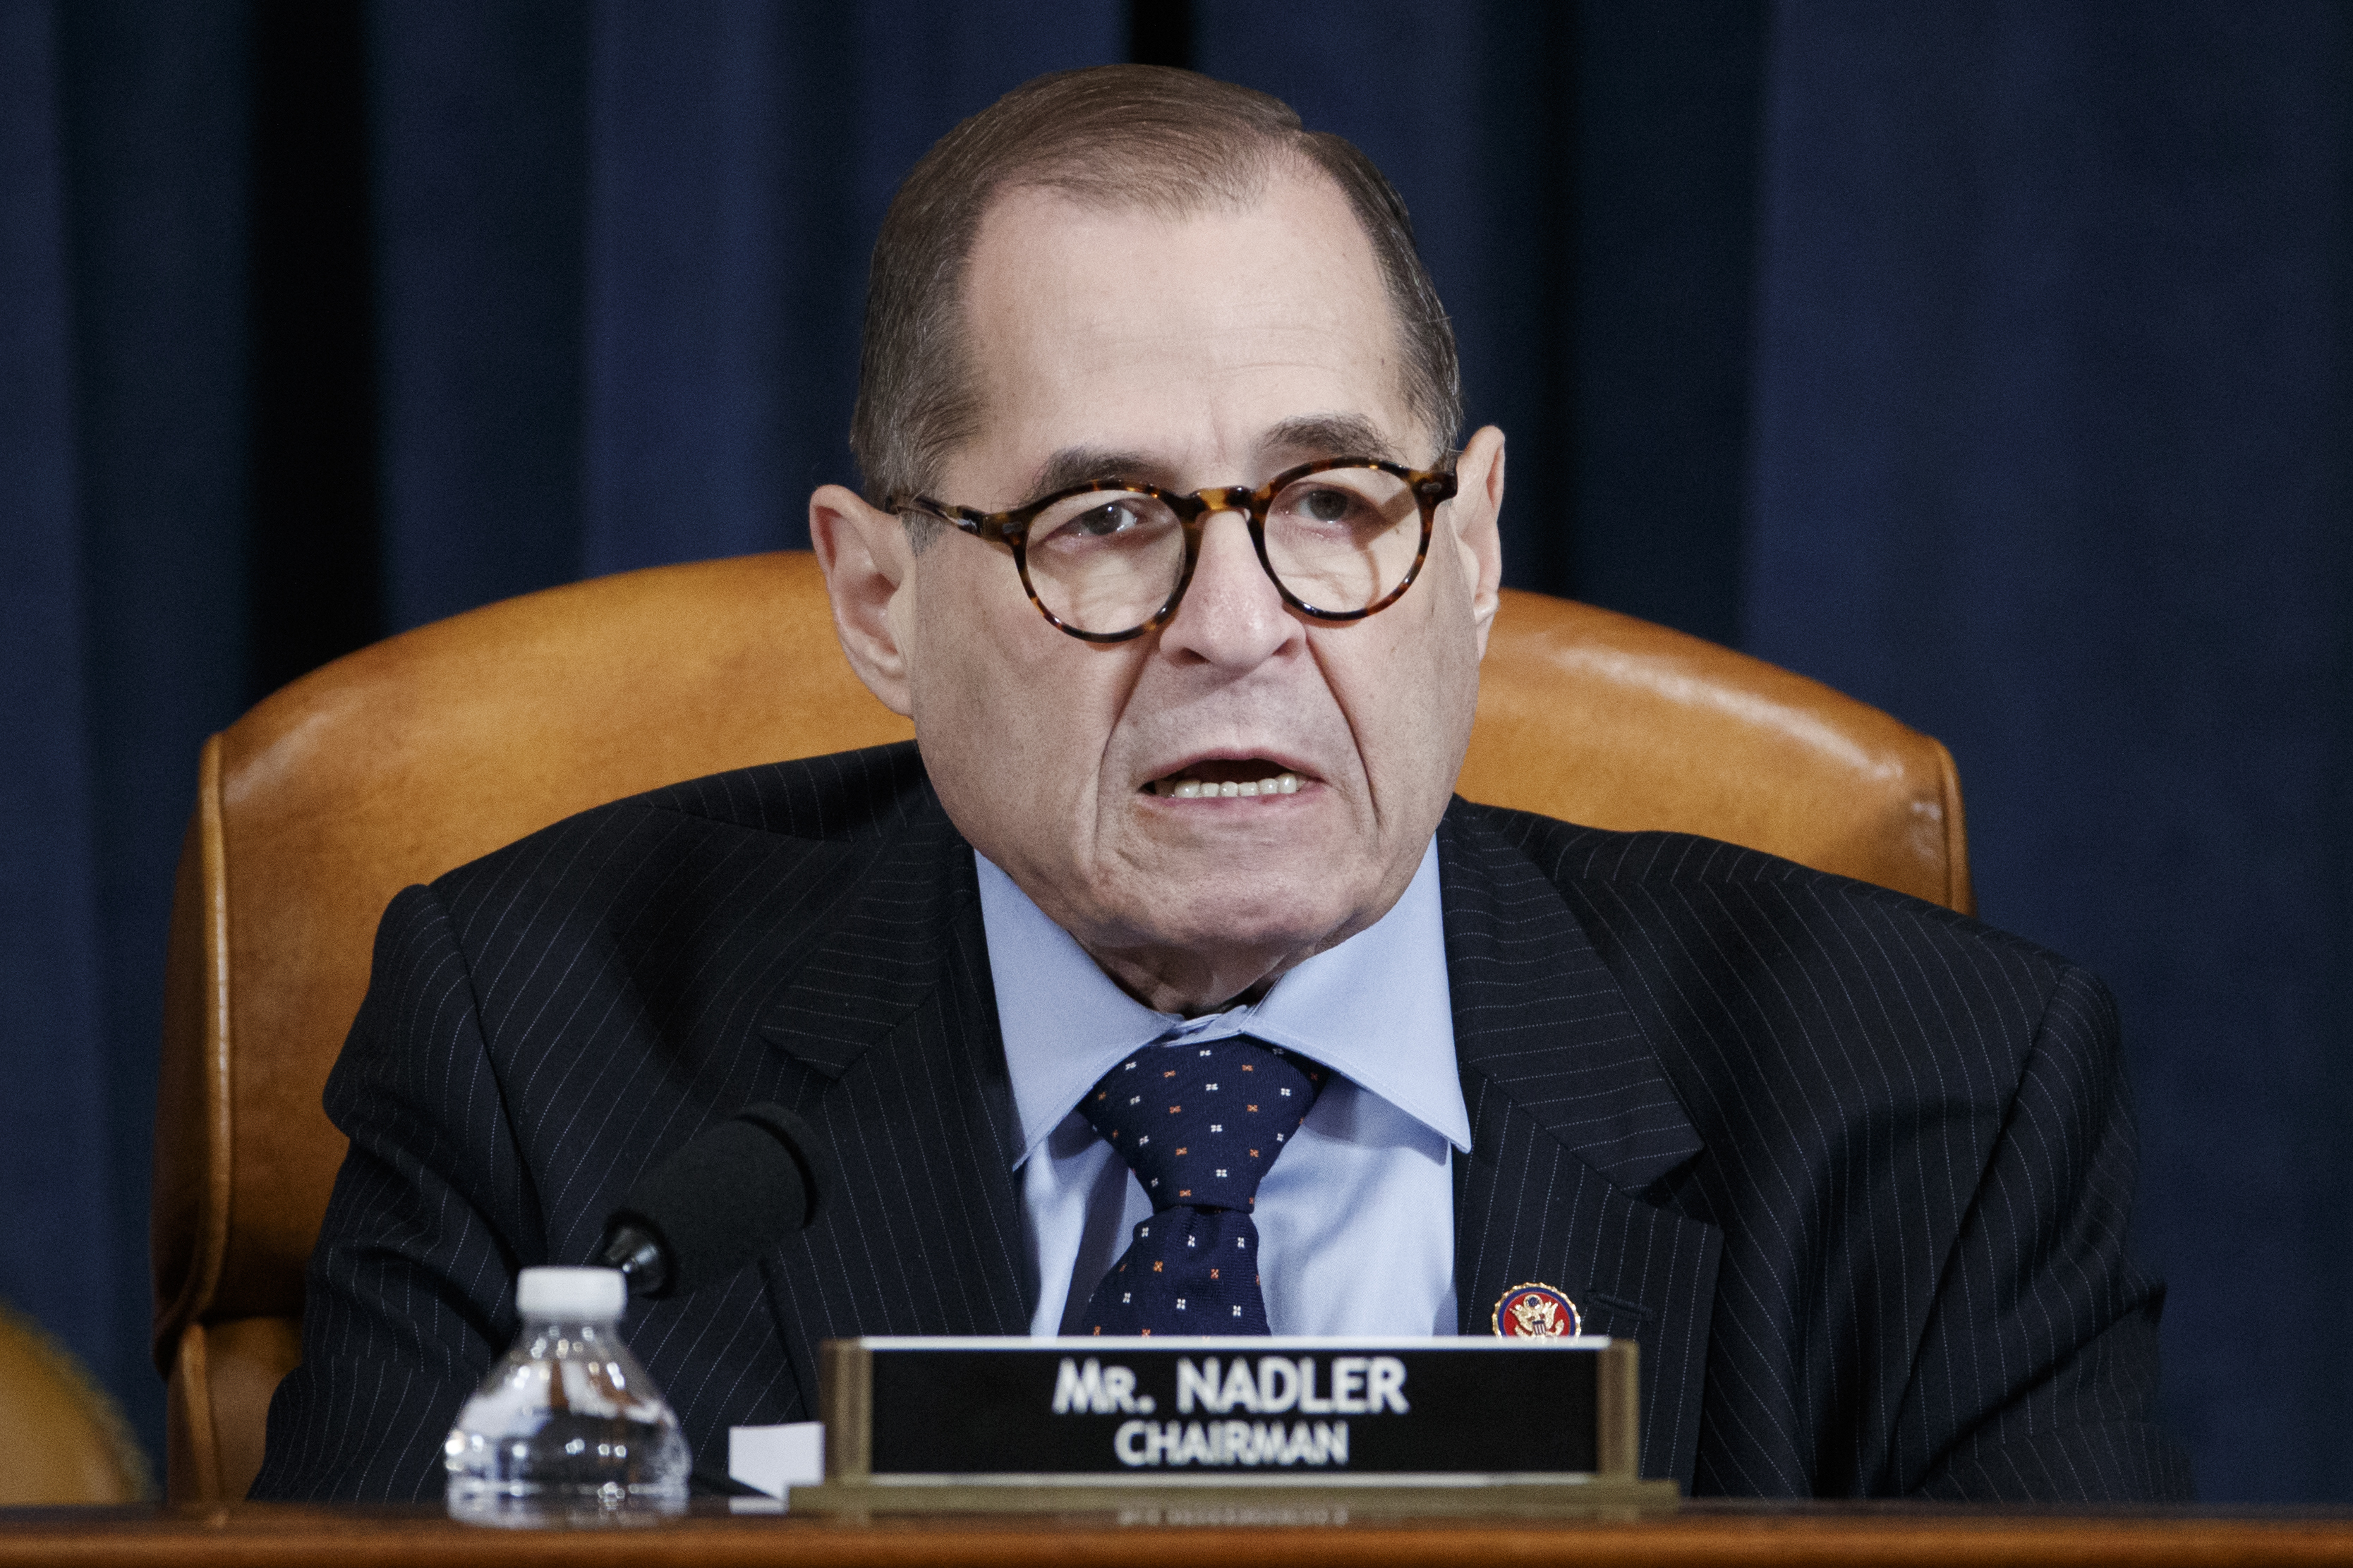 House Judiciary Committee Chairman Rep. Jerrold Nadler of N.Y. speaks during a House Judiciary Committee markup of the articles of impeachment against President Donald Trump on Capitol Hill in Washington, on Wednesday.